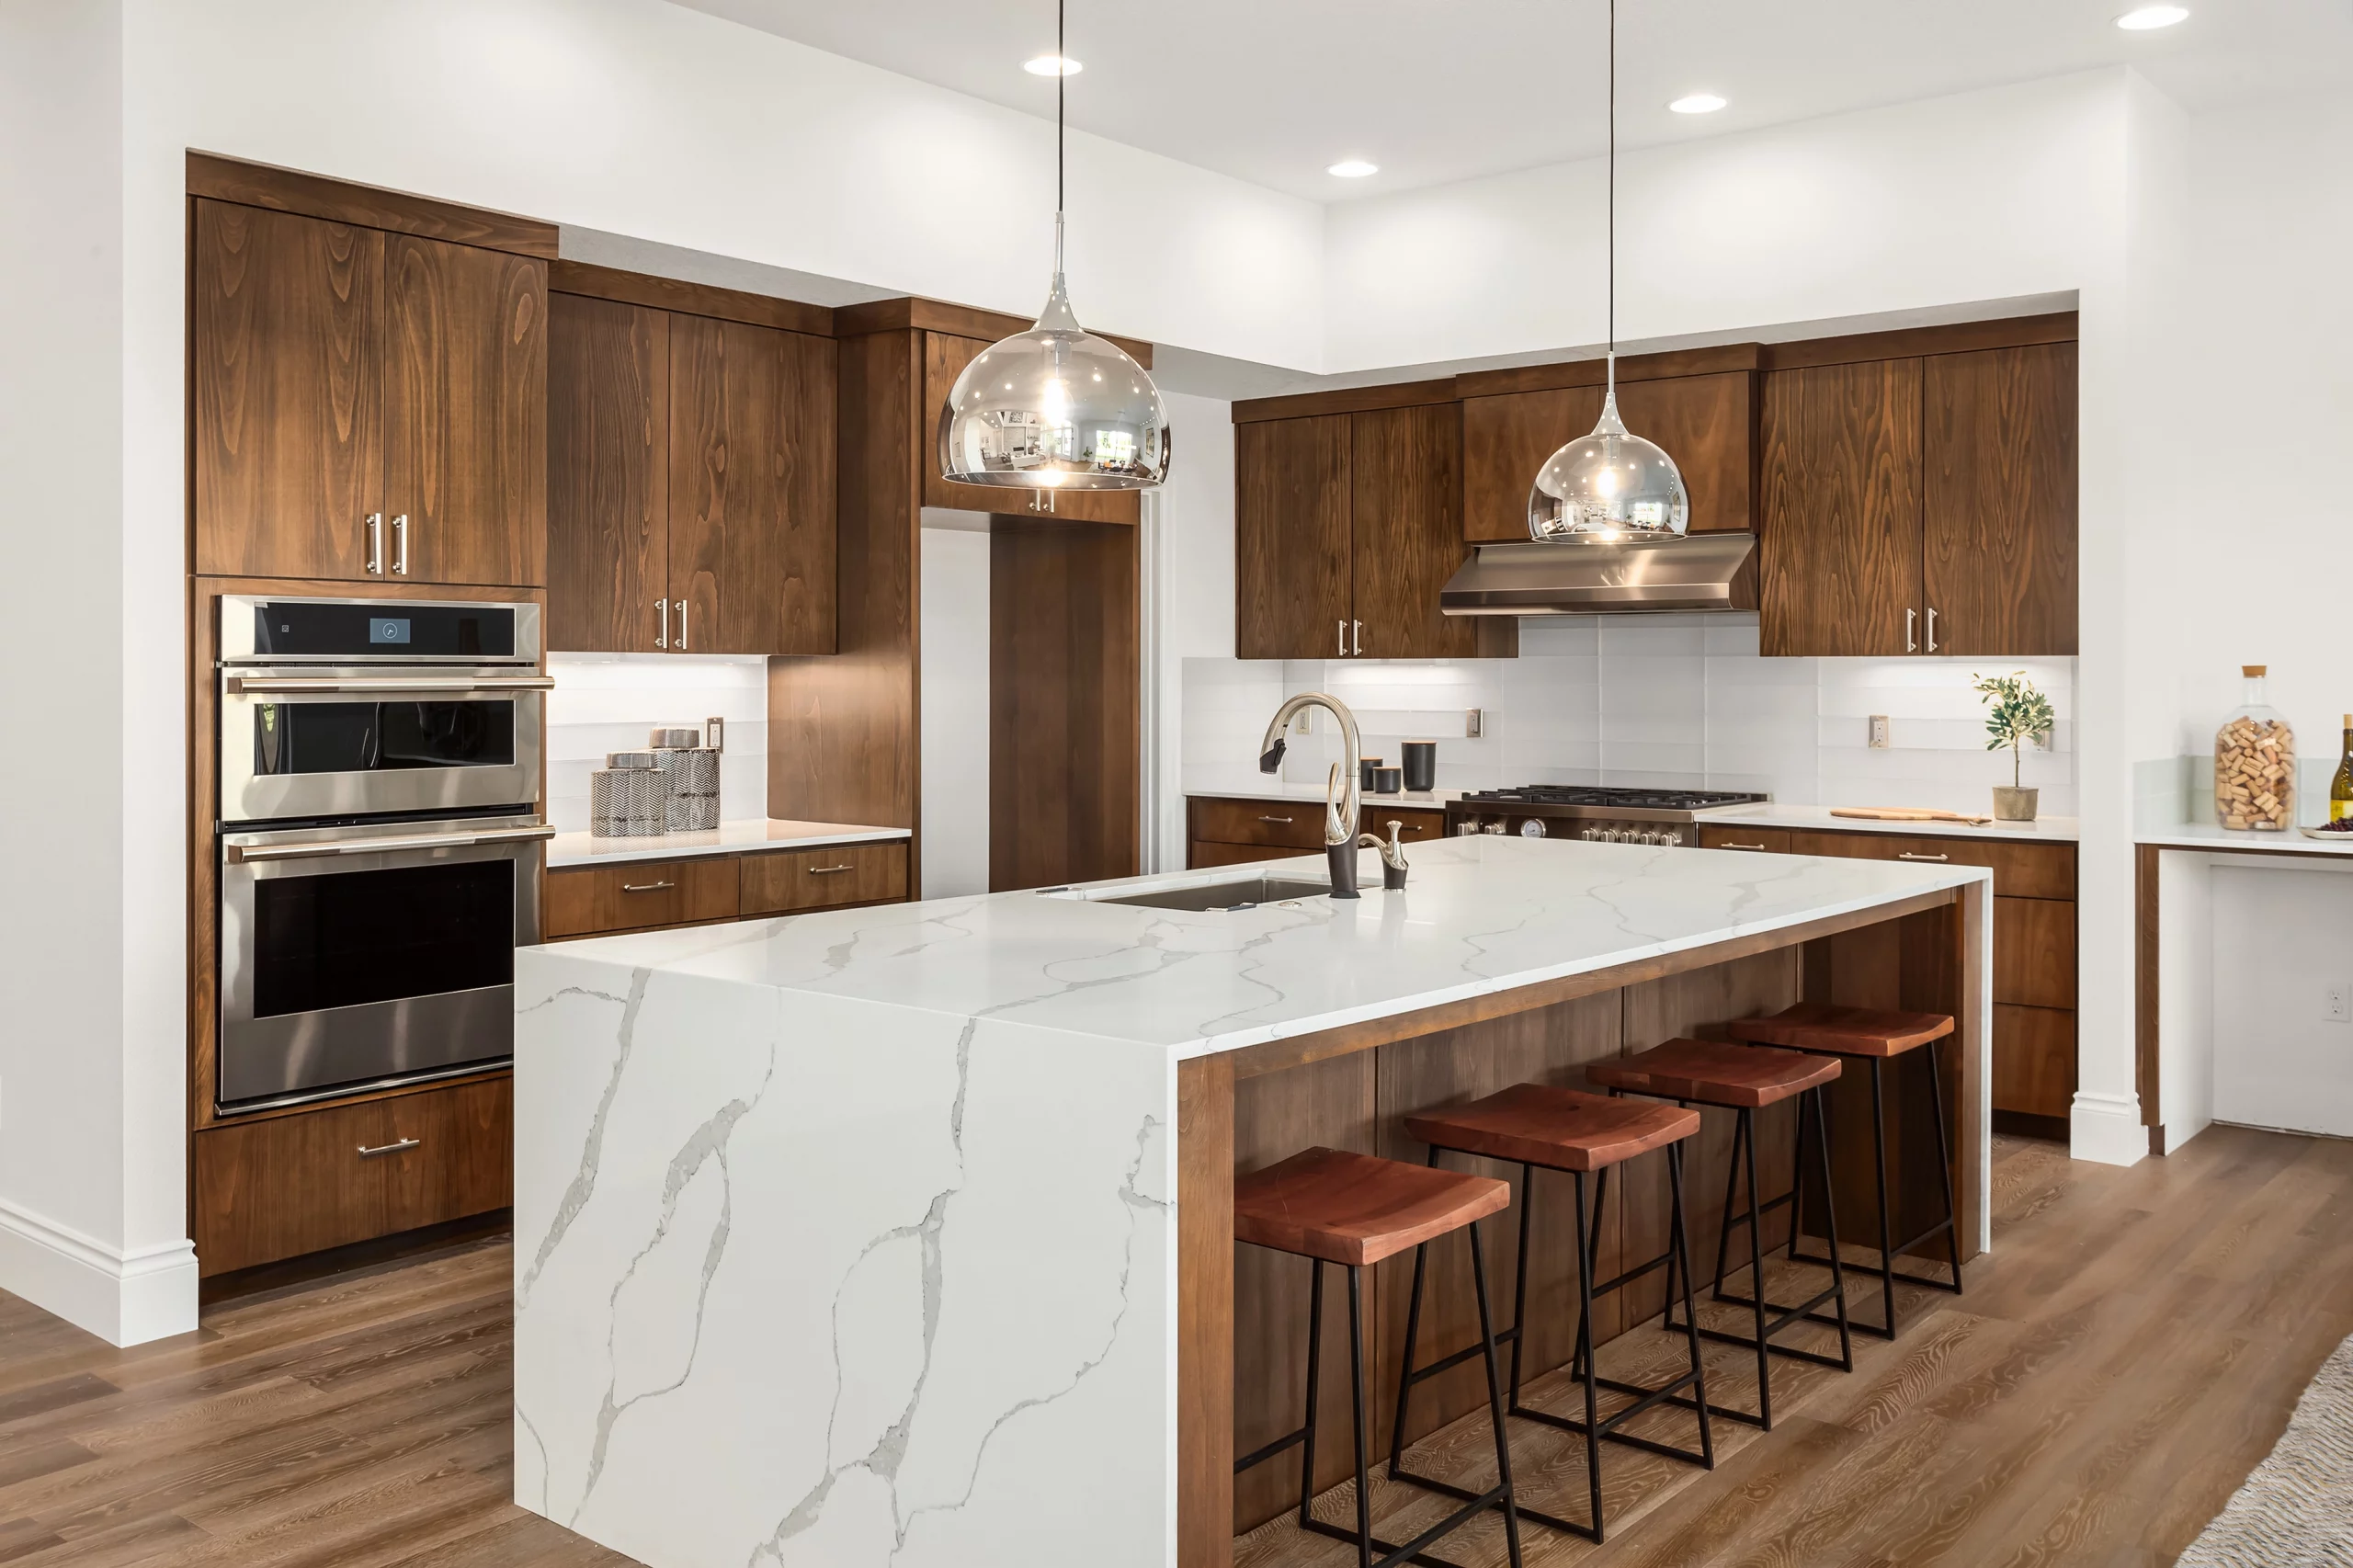 Blog-3 Factors to consider while buying Quartz Countertops